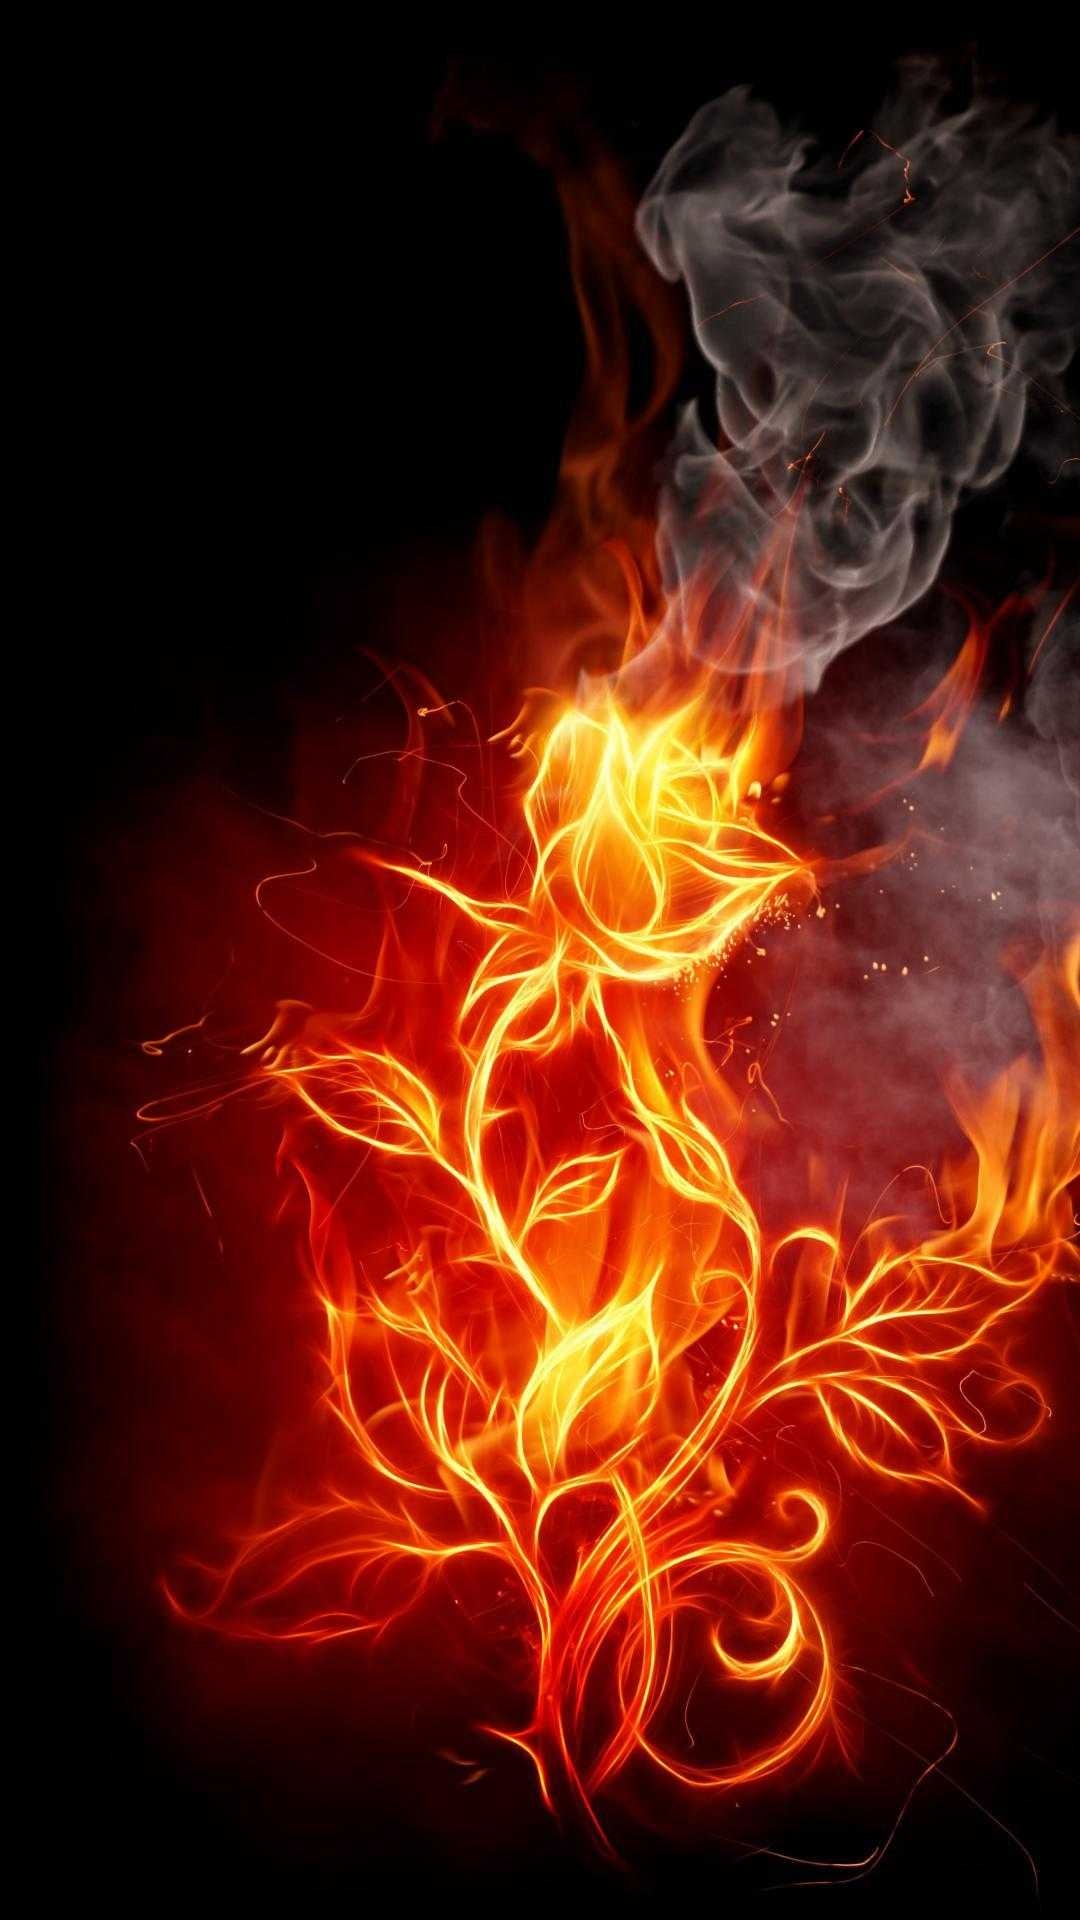 Blazing heat, HD fire wallpaper, Intense flames, Vibrant colors, Warmth and energy, 1080x1920 Full HD Phone